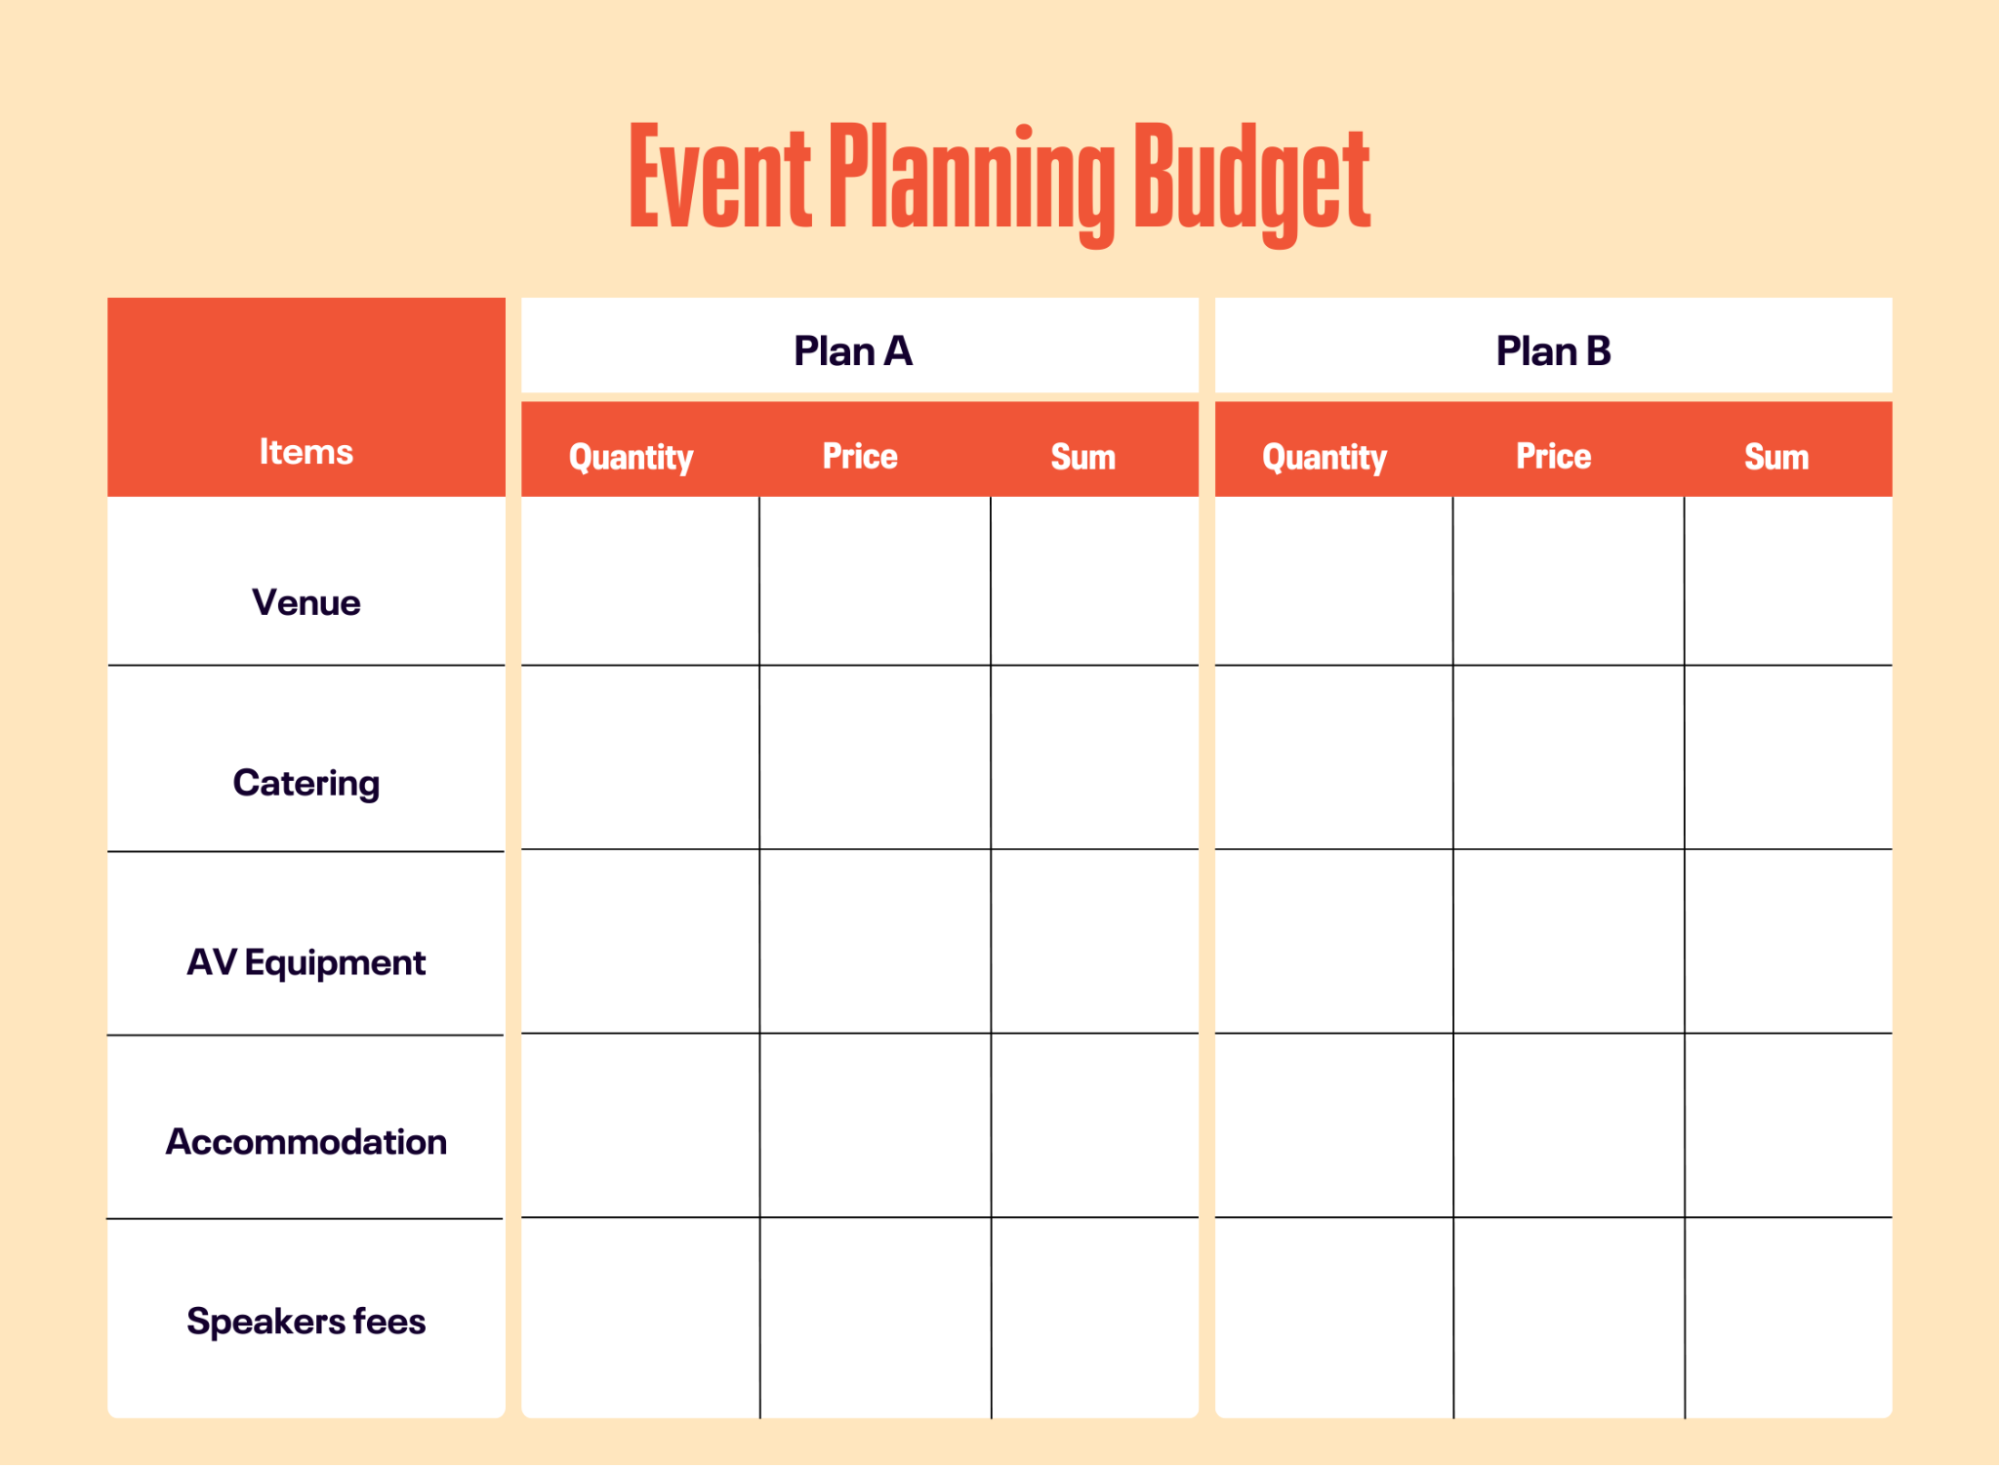 Event Planning Budget Table